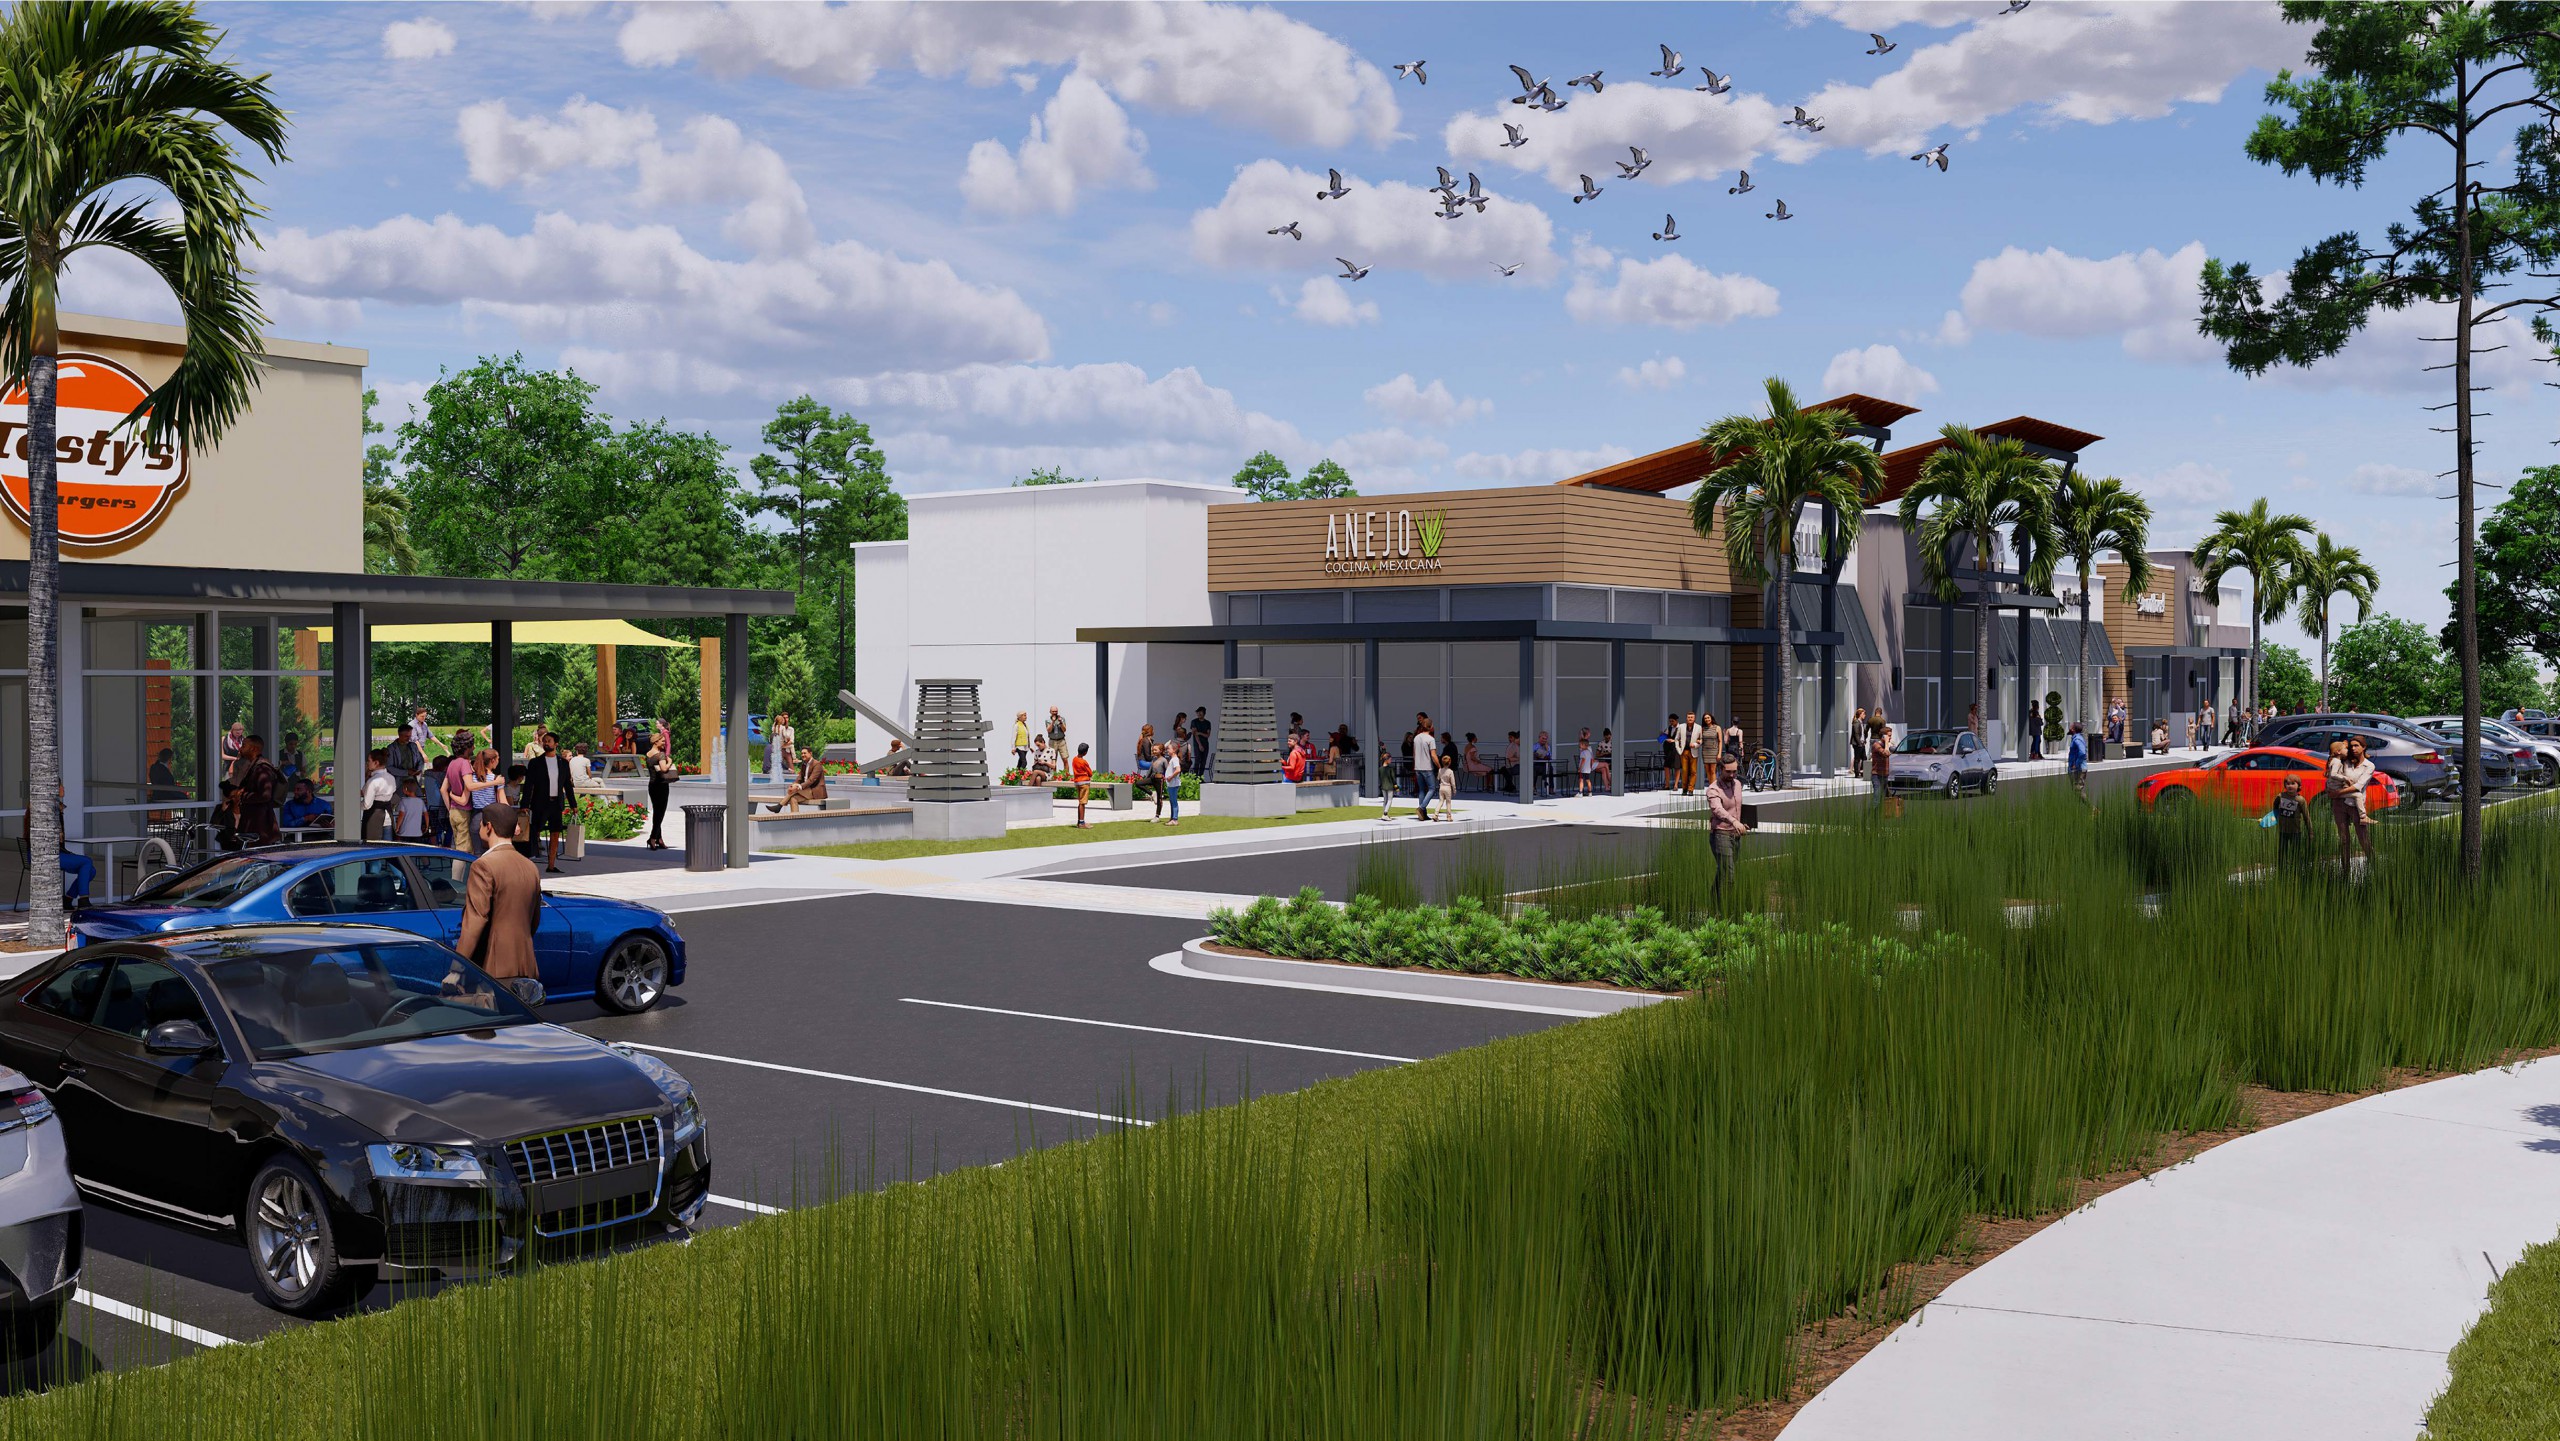 Exterior rendering of three new restaurant and retail concepts set to open in Skinner Bros. Realty's multi-tenant retail complex in Wildlight this spring. Featuring Anejo Cocino Mexicana and Tasty's Burgers. There's also a courtyard with a fountain and people walking by.